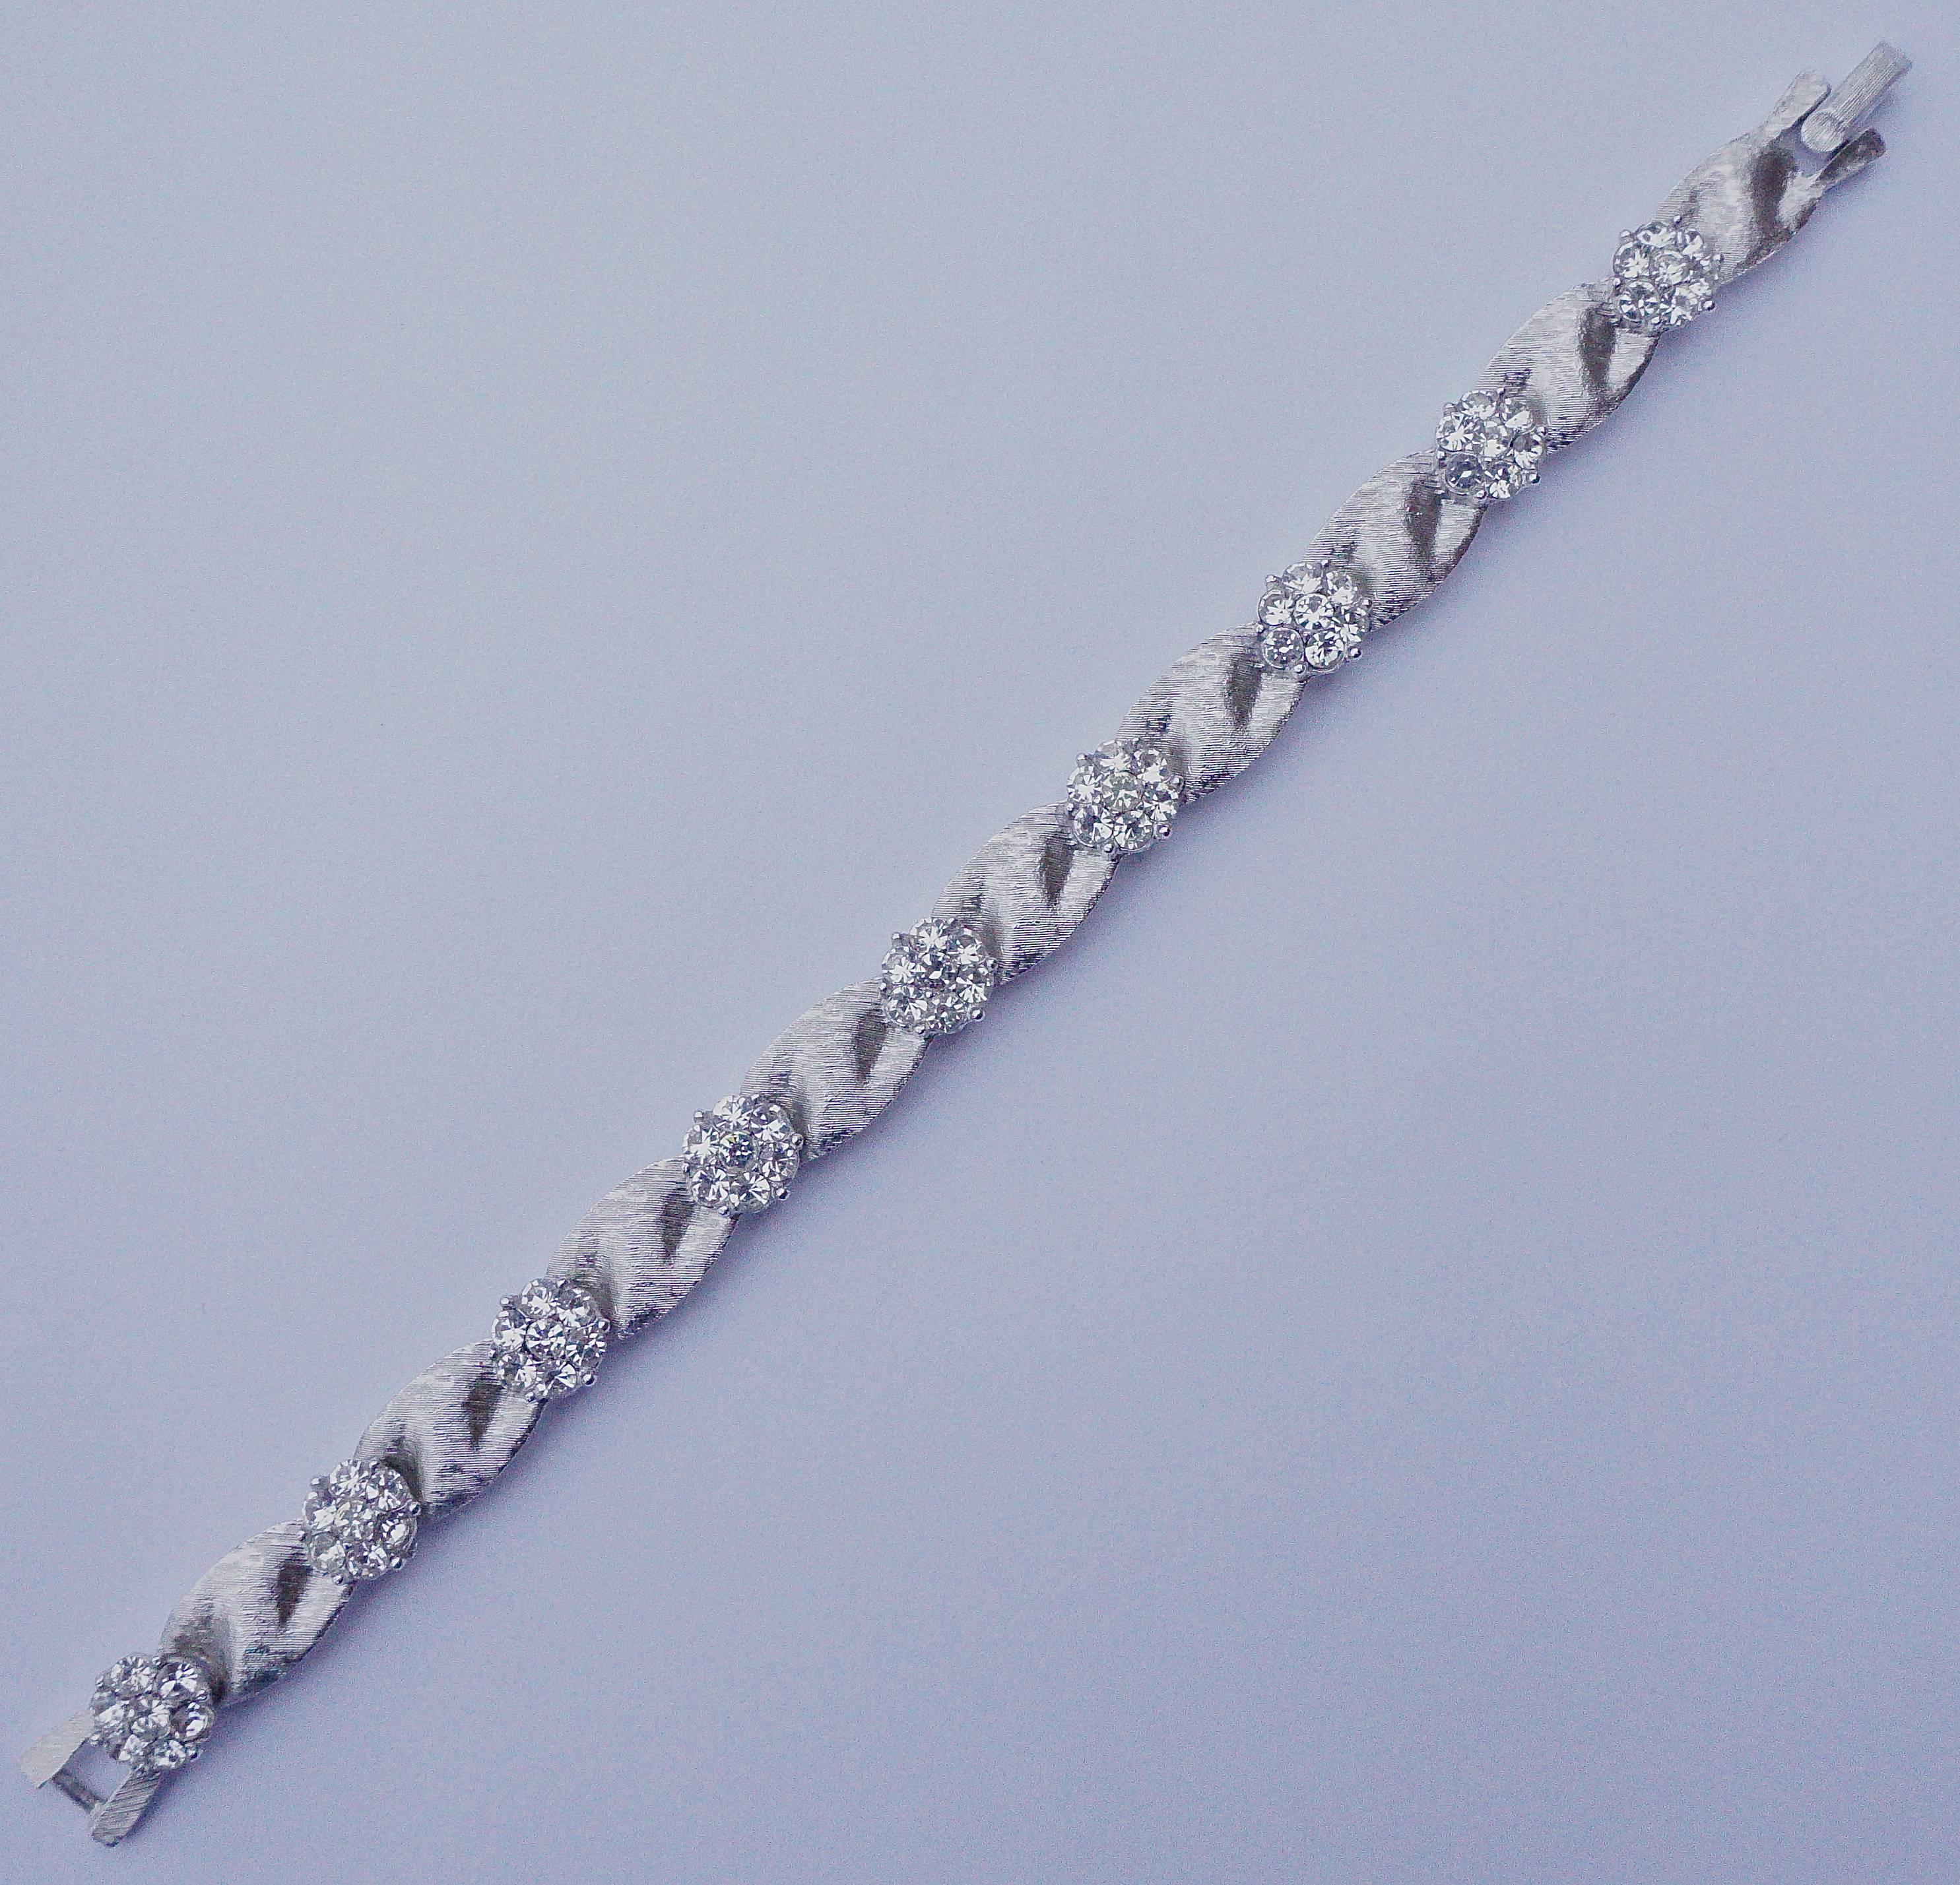 Trifari brushed silver plated ribbon design bracelet, length 18.5cm / 7.3 inches by width 9mm / .35 inch. This beautiful vintage bracelet is from Trifari's Birthday Collection, diamond rhinestones for April. Circa 1960s.

This is a stunning vintage